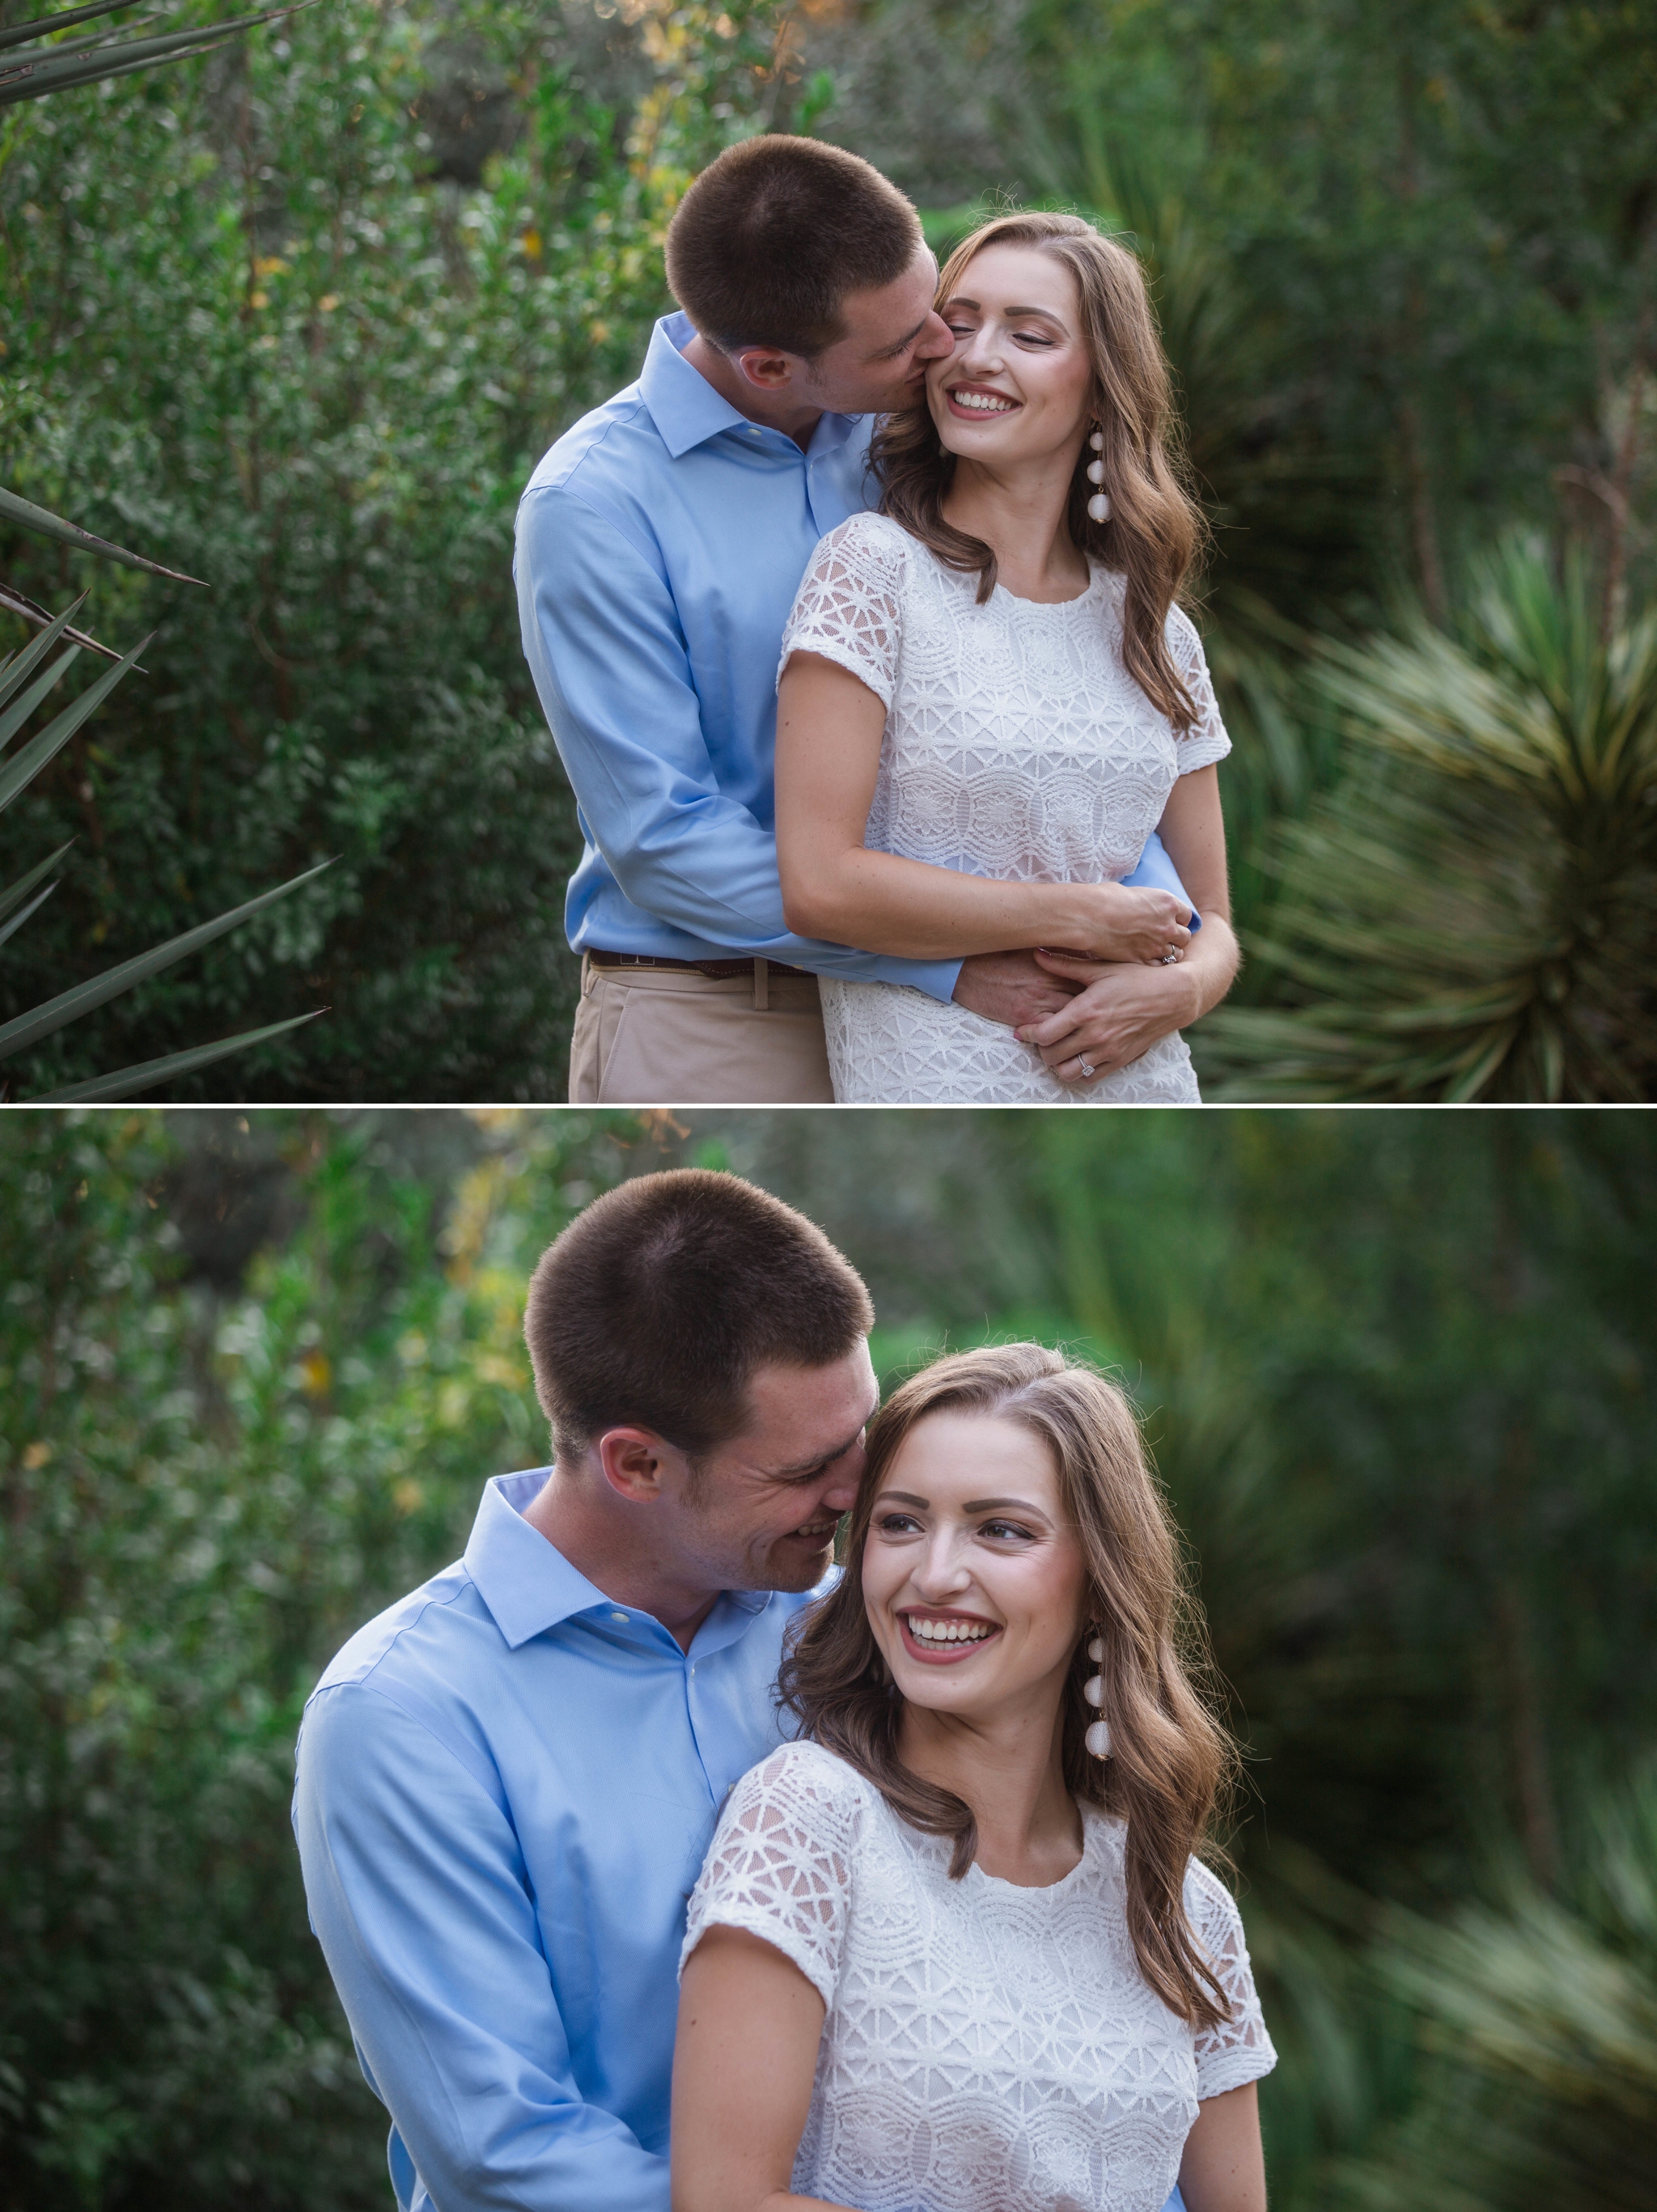 Paige + Tyler - Engagement Photography Session at the JC Raulston Arboretum - Raleigh Wedding Photographer 5.jpg